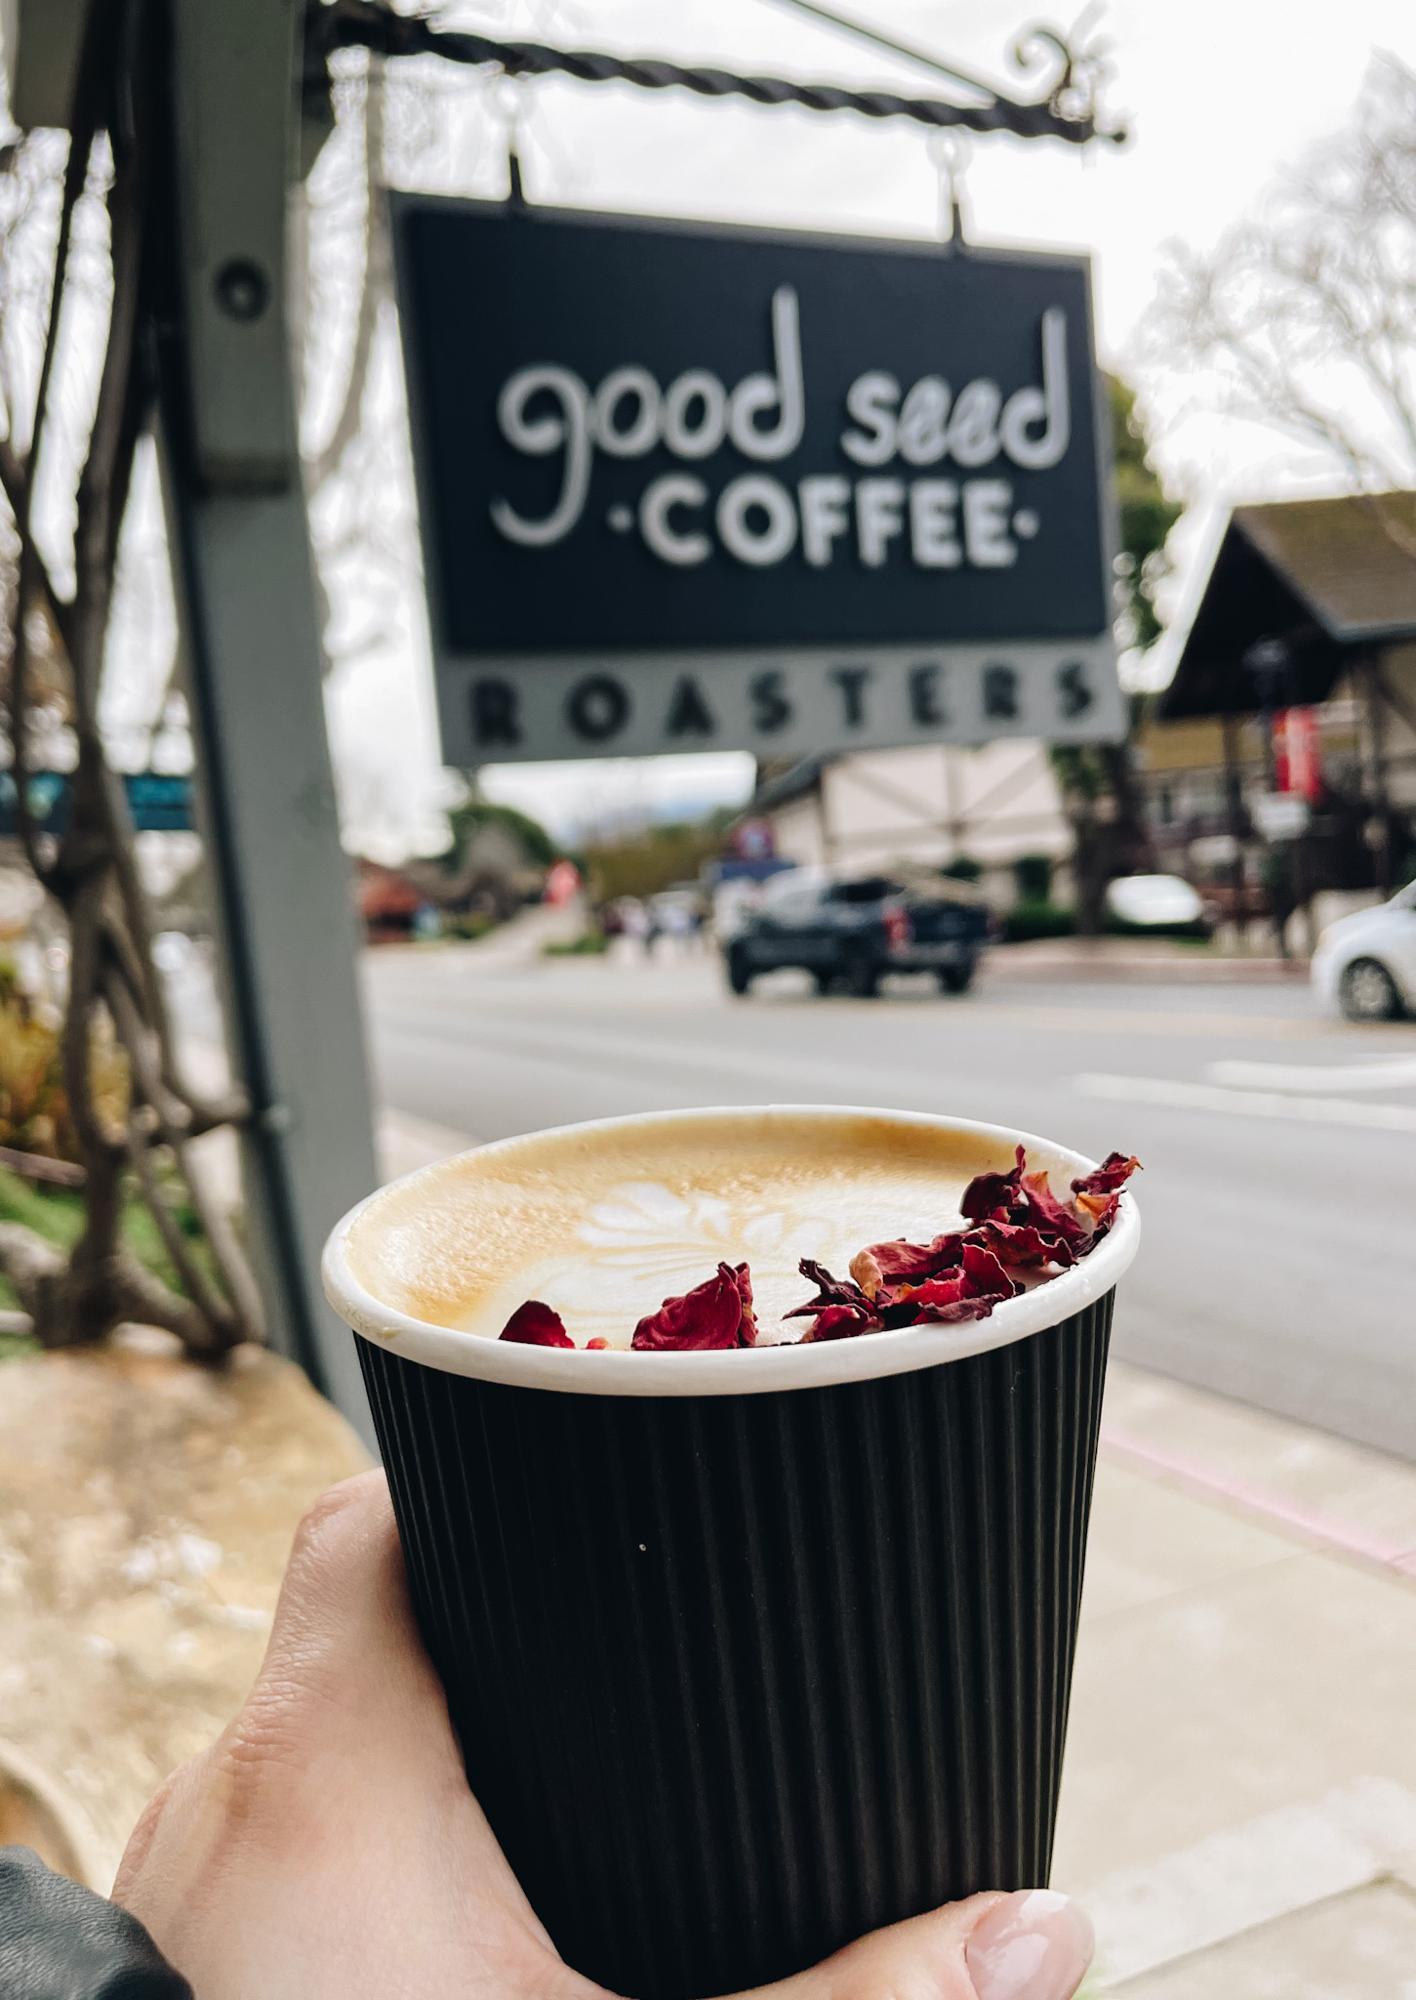 Good Seed Coffee Roasters exterior with rose latte in hand